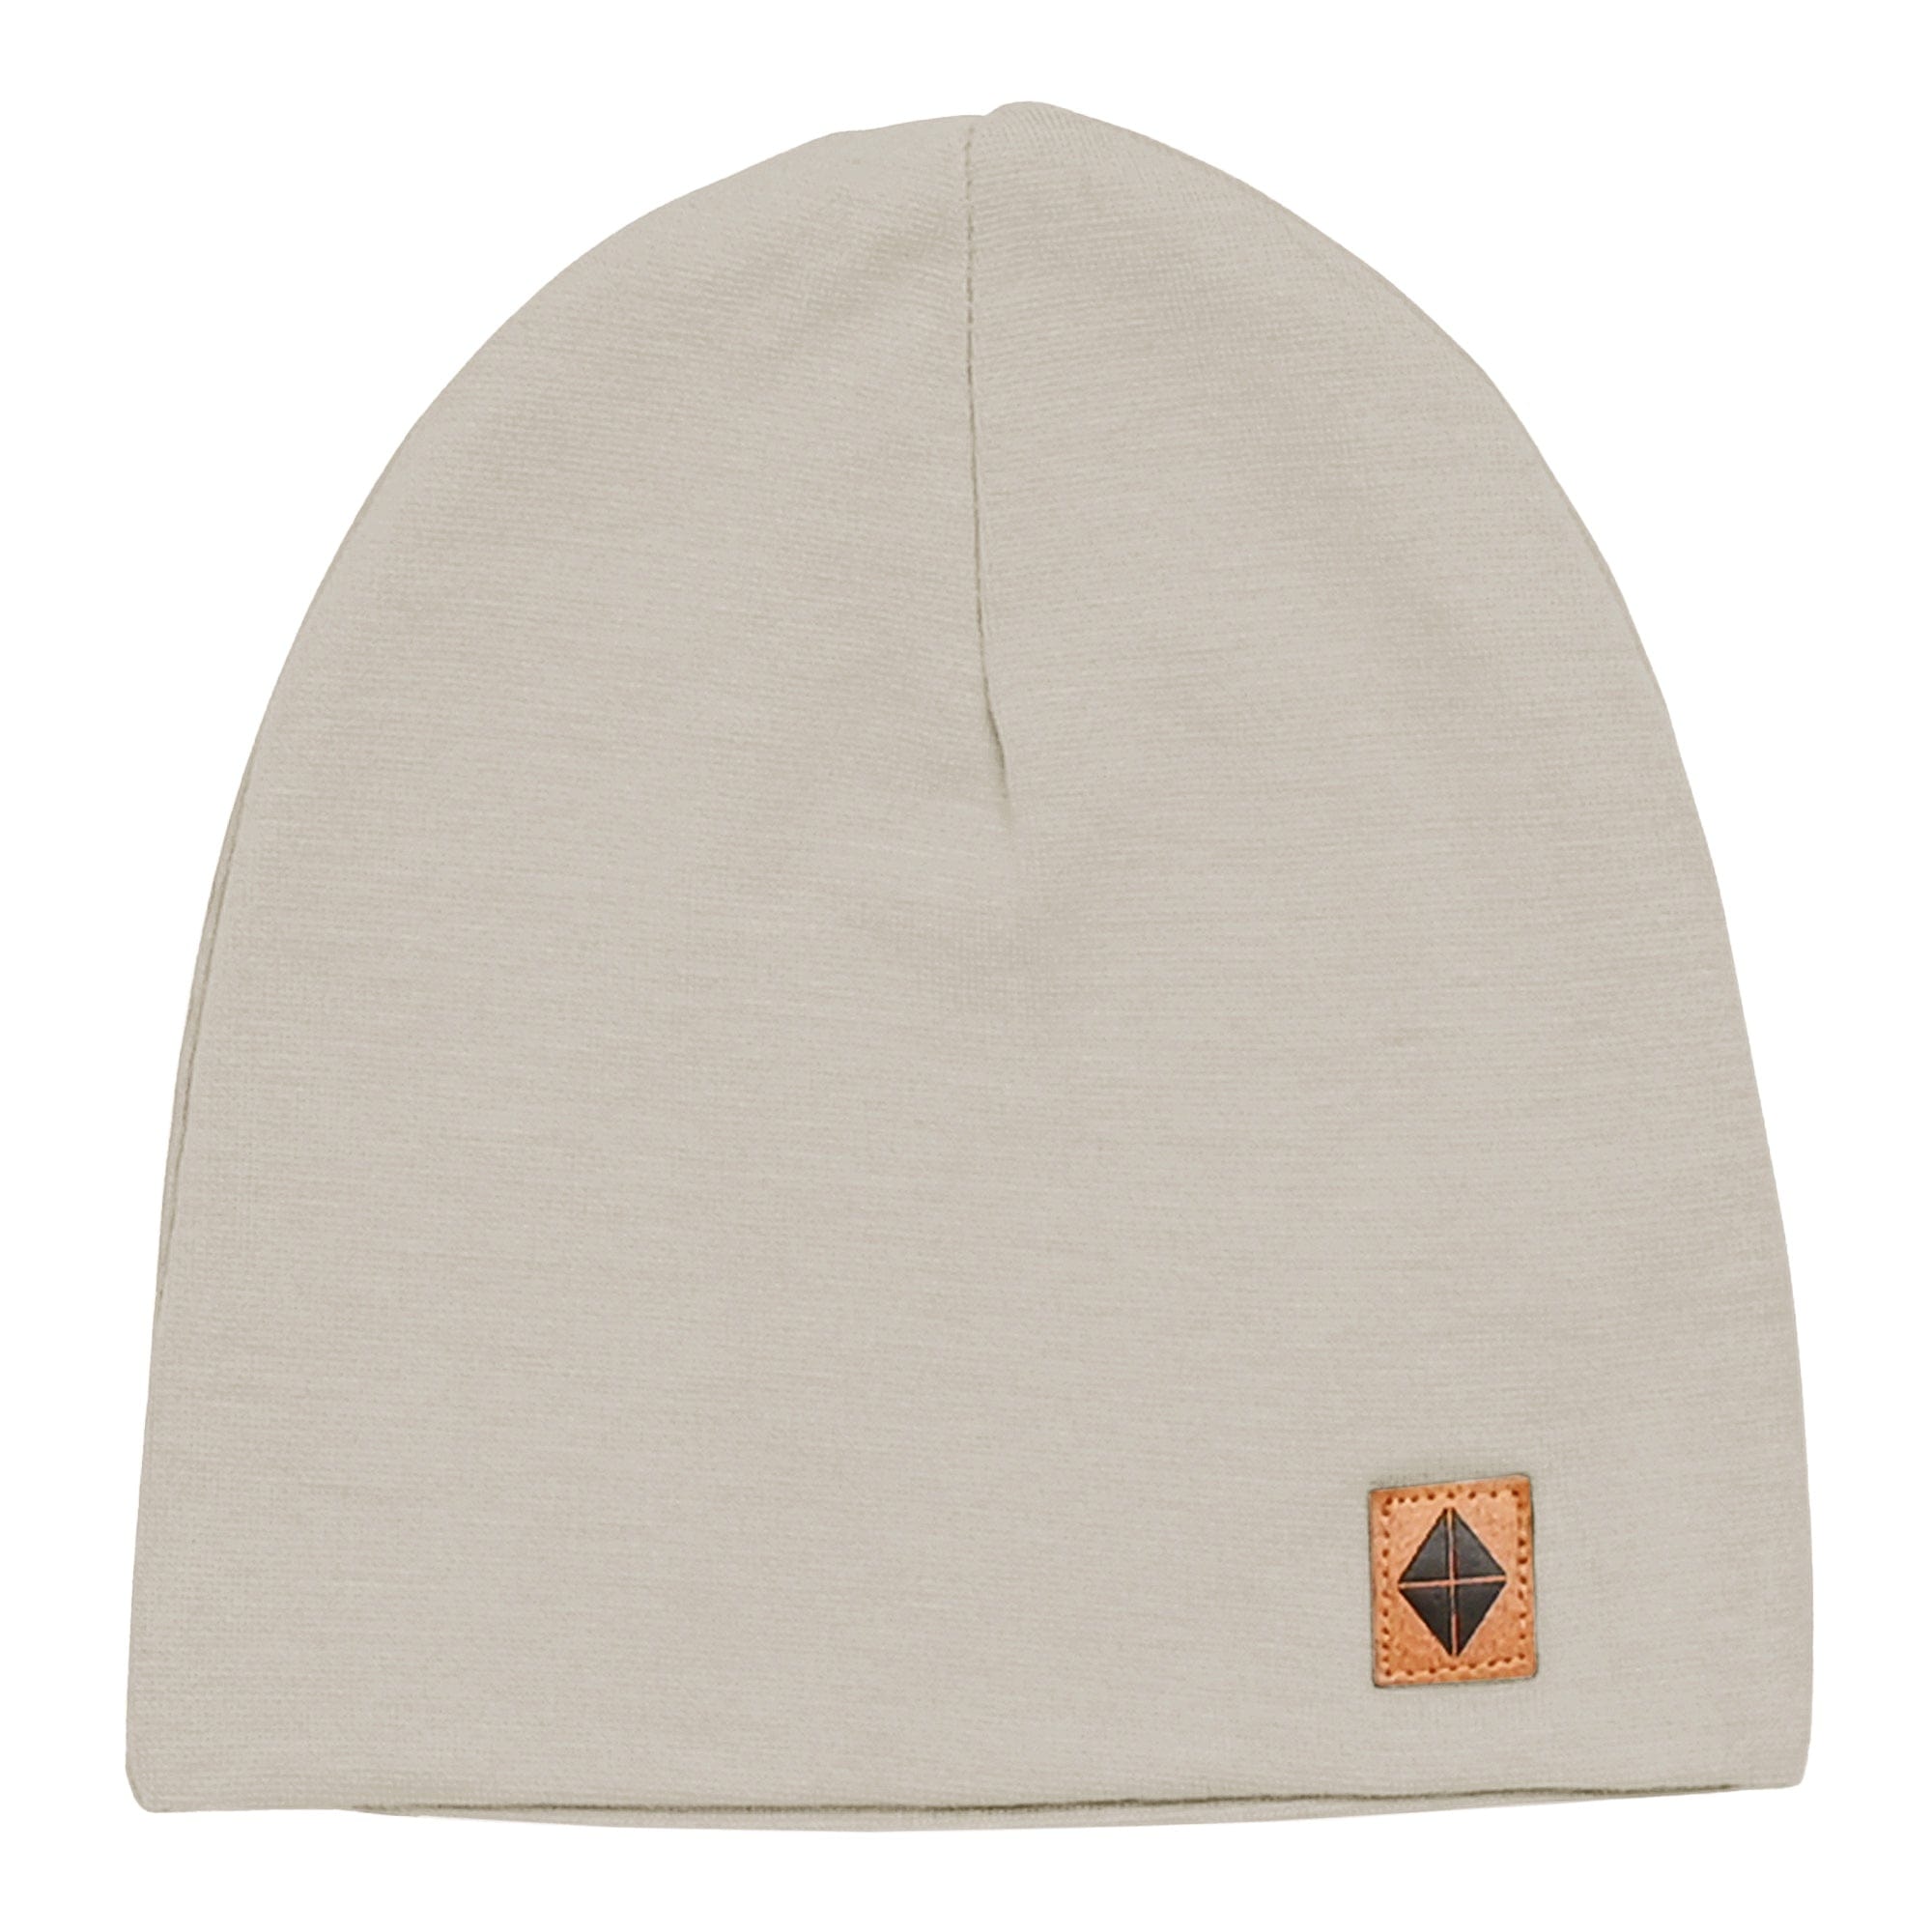 Kyte BABY Adult Beanie Bamboo Jersey Adult Beanie in Khaki